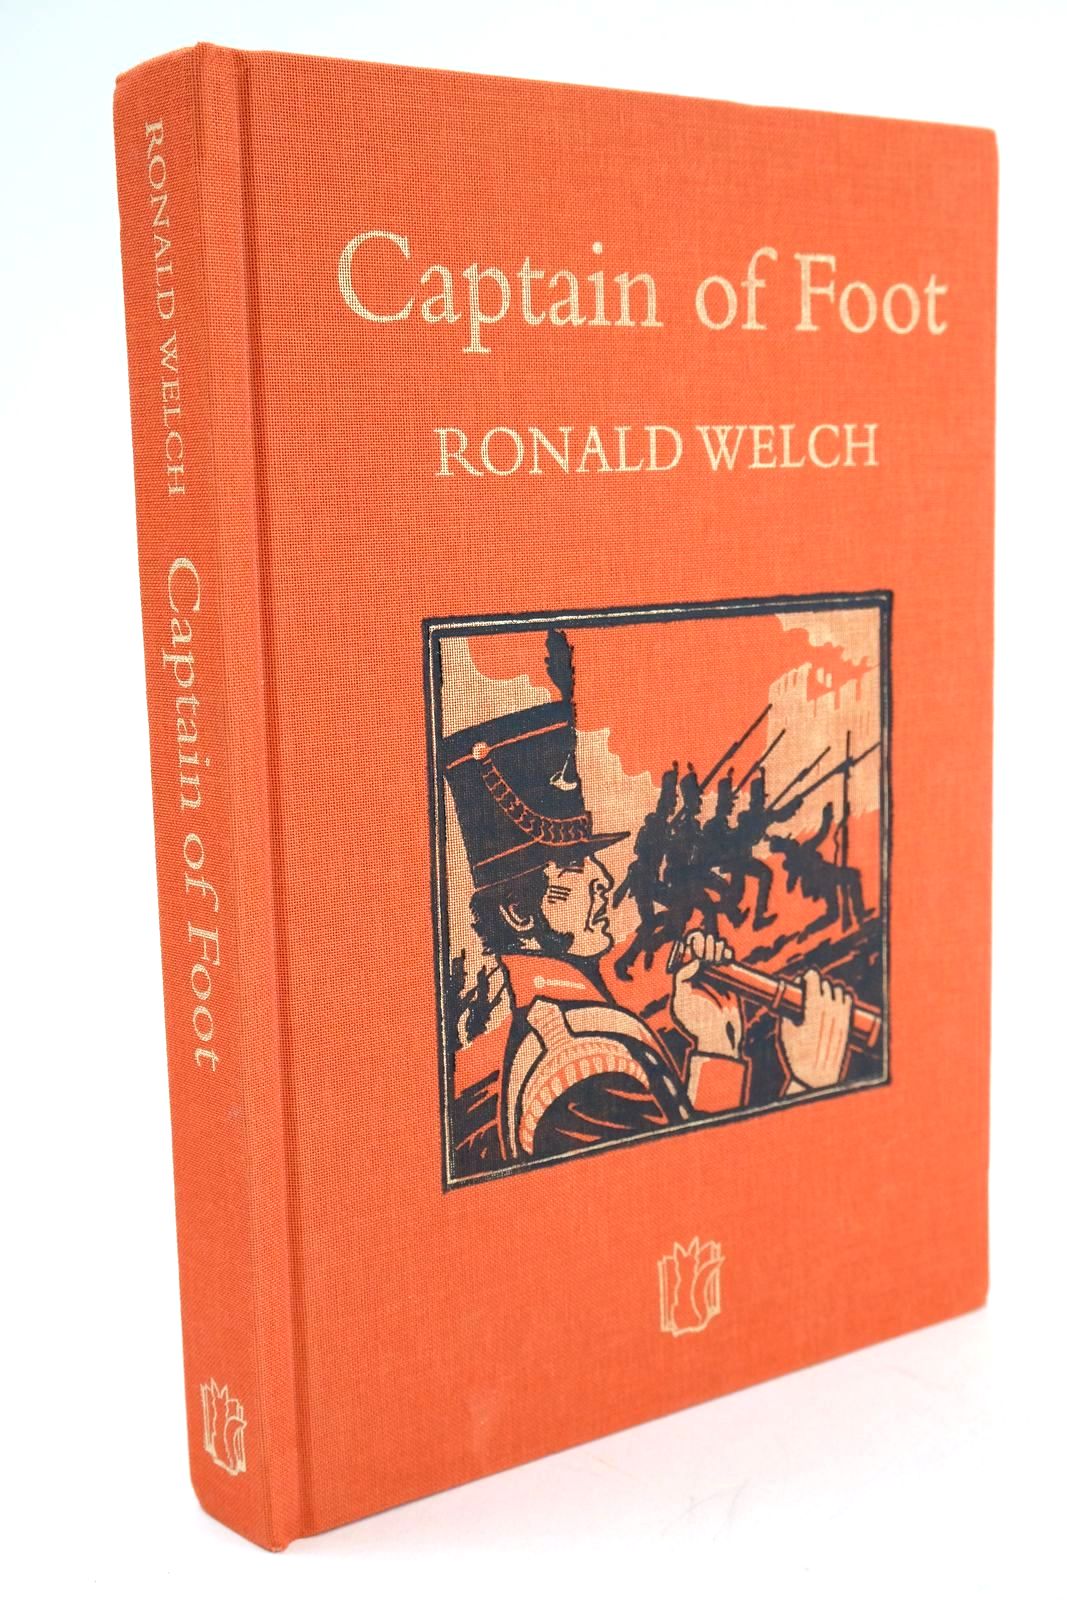 Photo of CAPTAIN OF FOOT written by Welch, Ronald illustrated by Stobbs, William published by Slightly Foxed Ltd. (STOCK CODE: 1324798)  for sale by Stella & Rose's Books